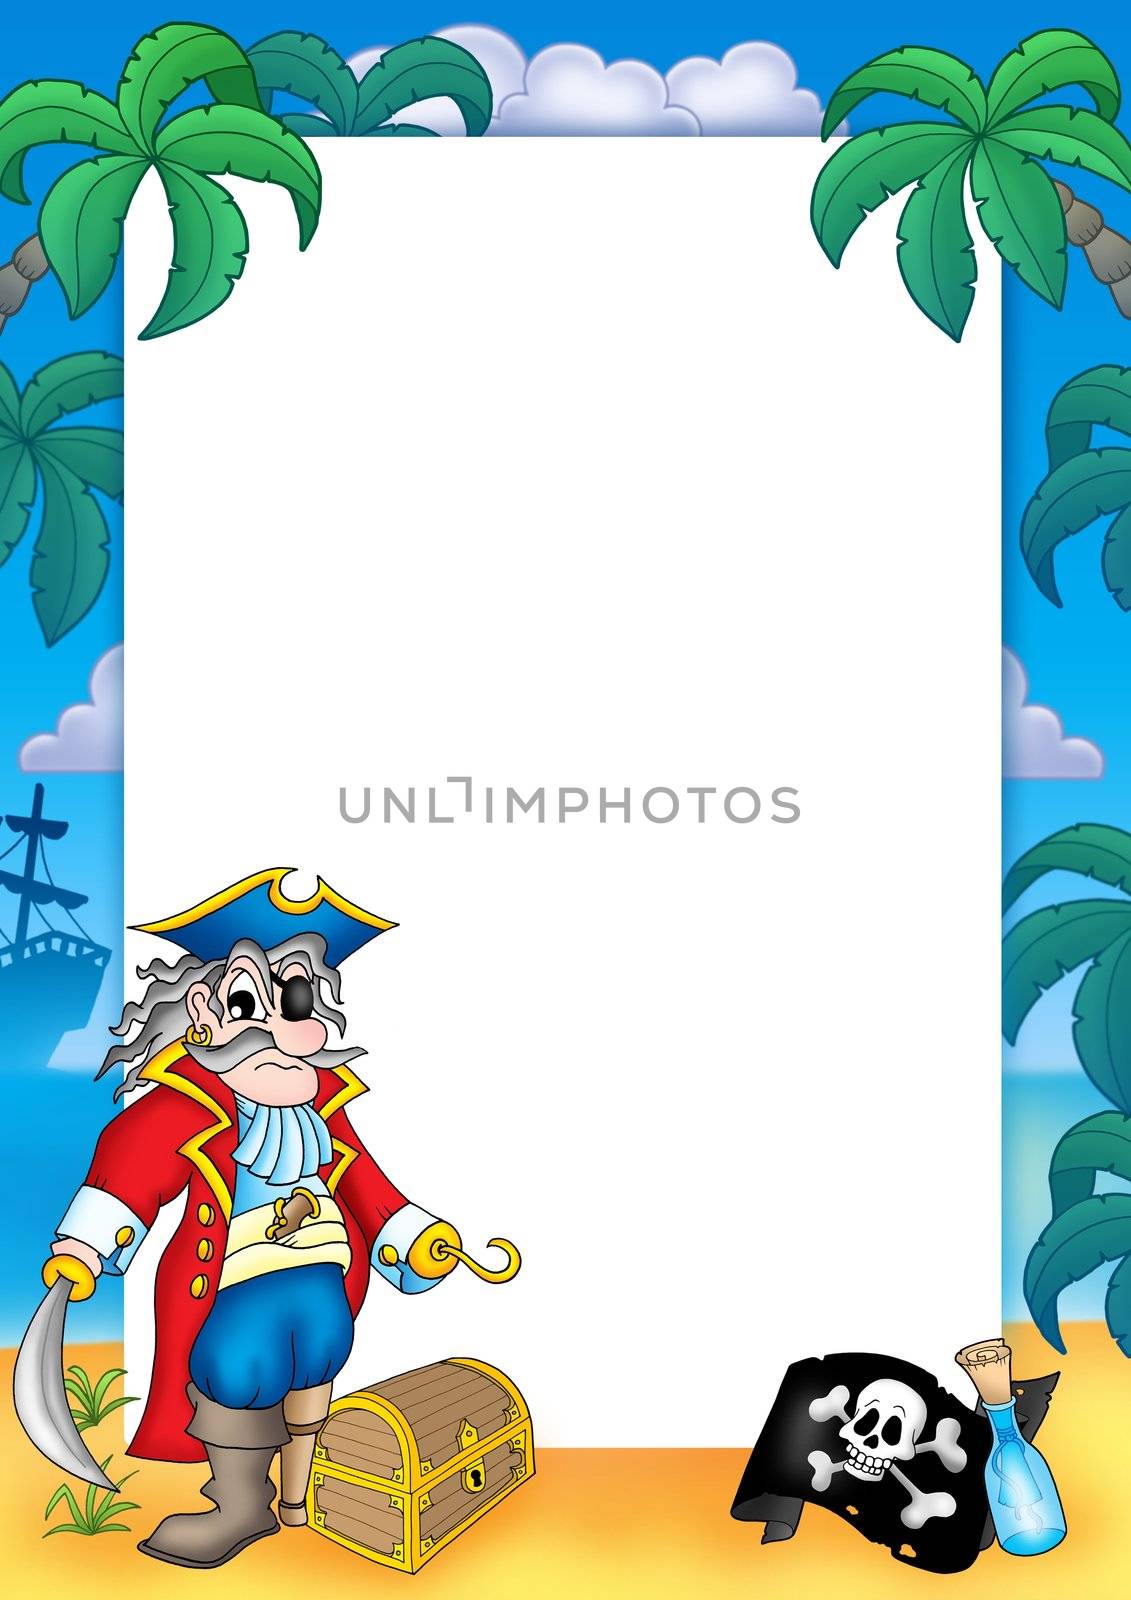 Frame with pirate 3 - color illustration.